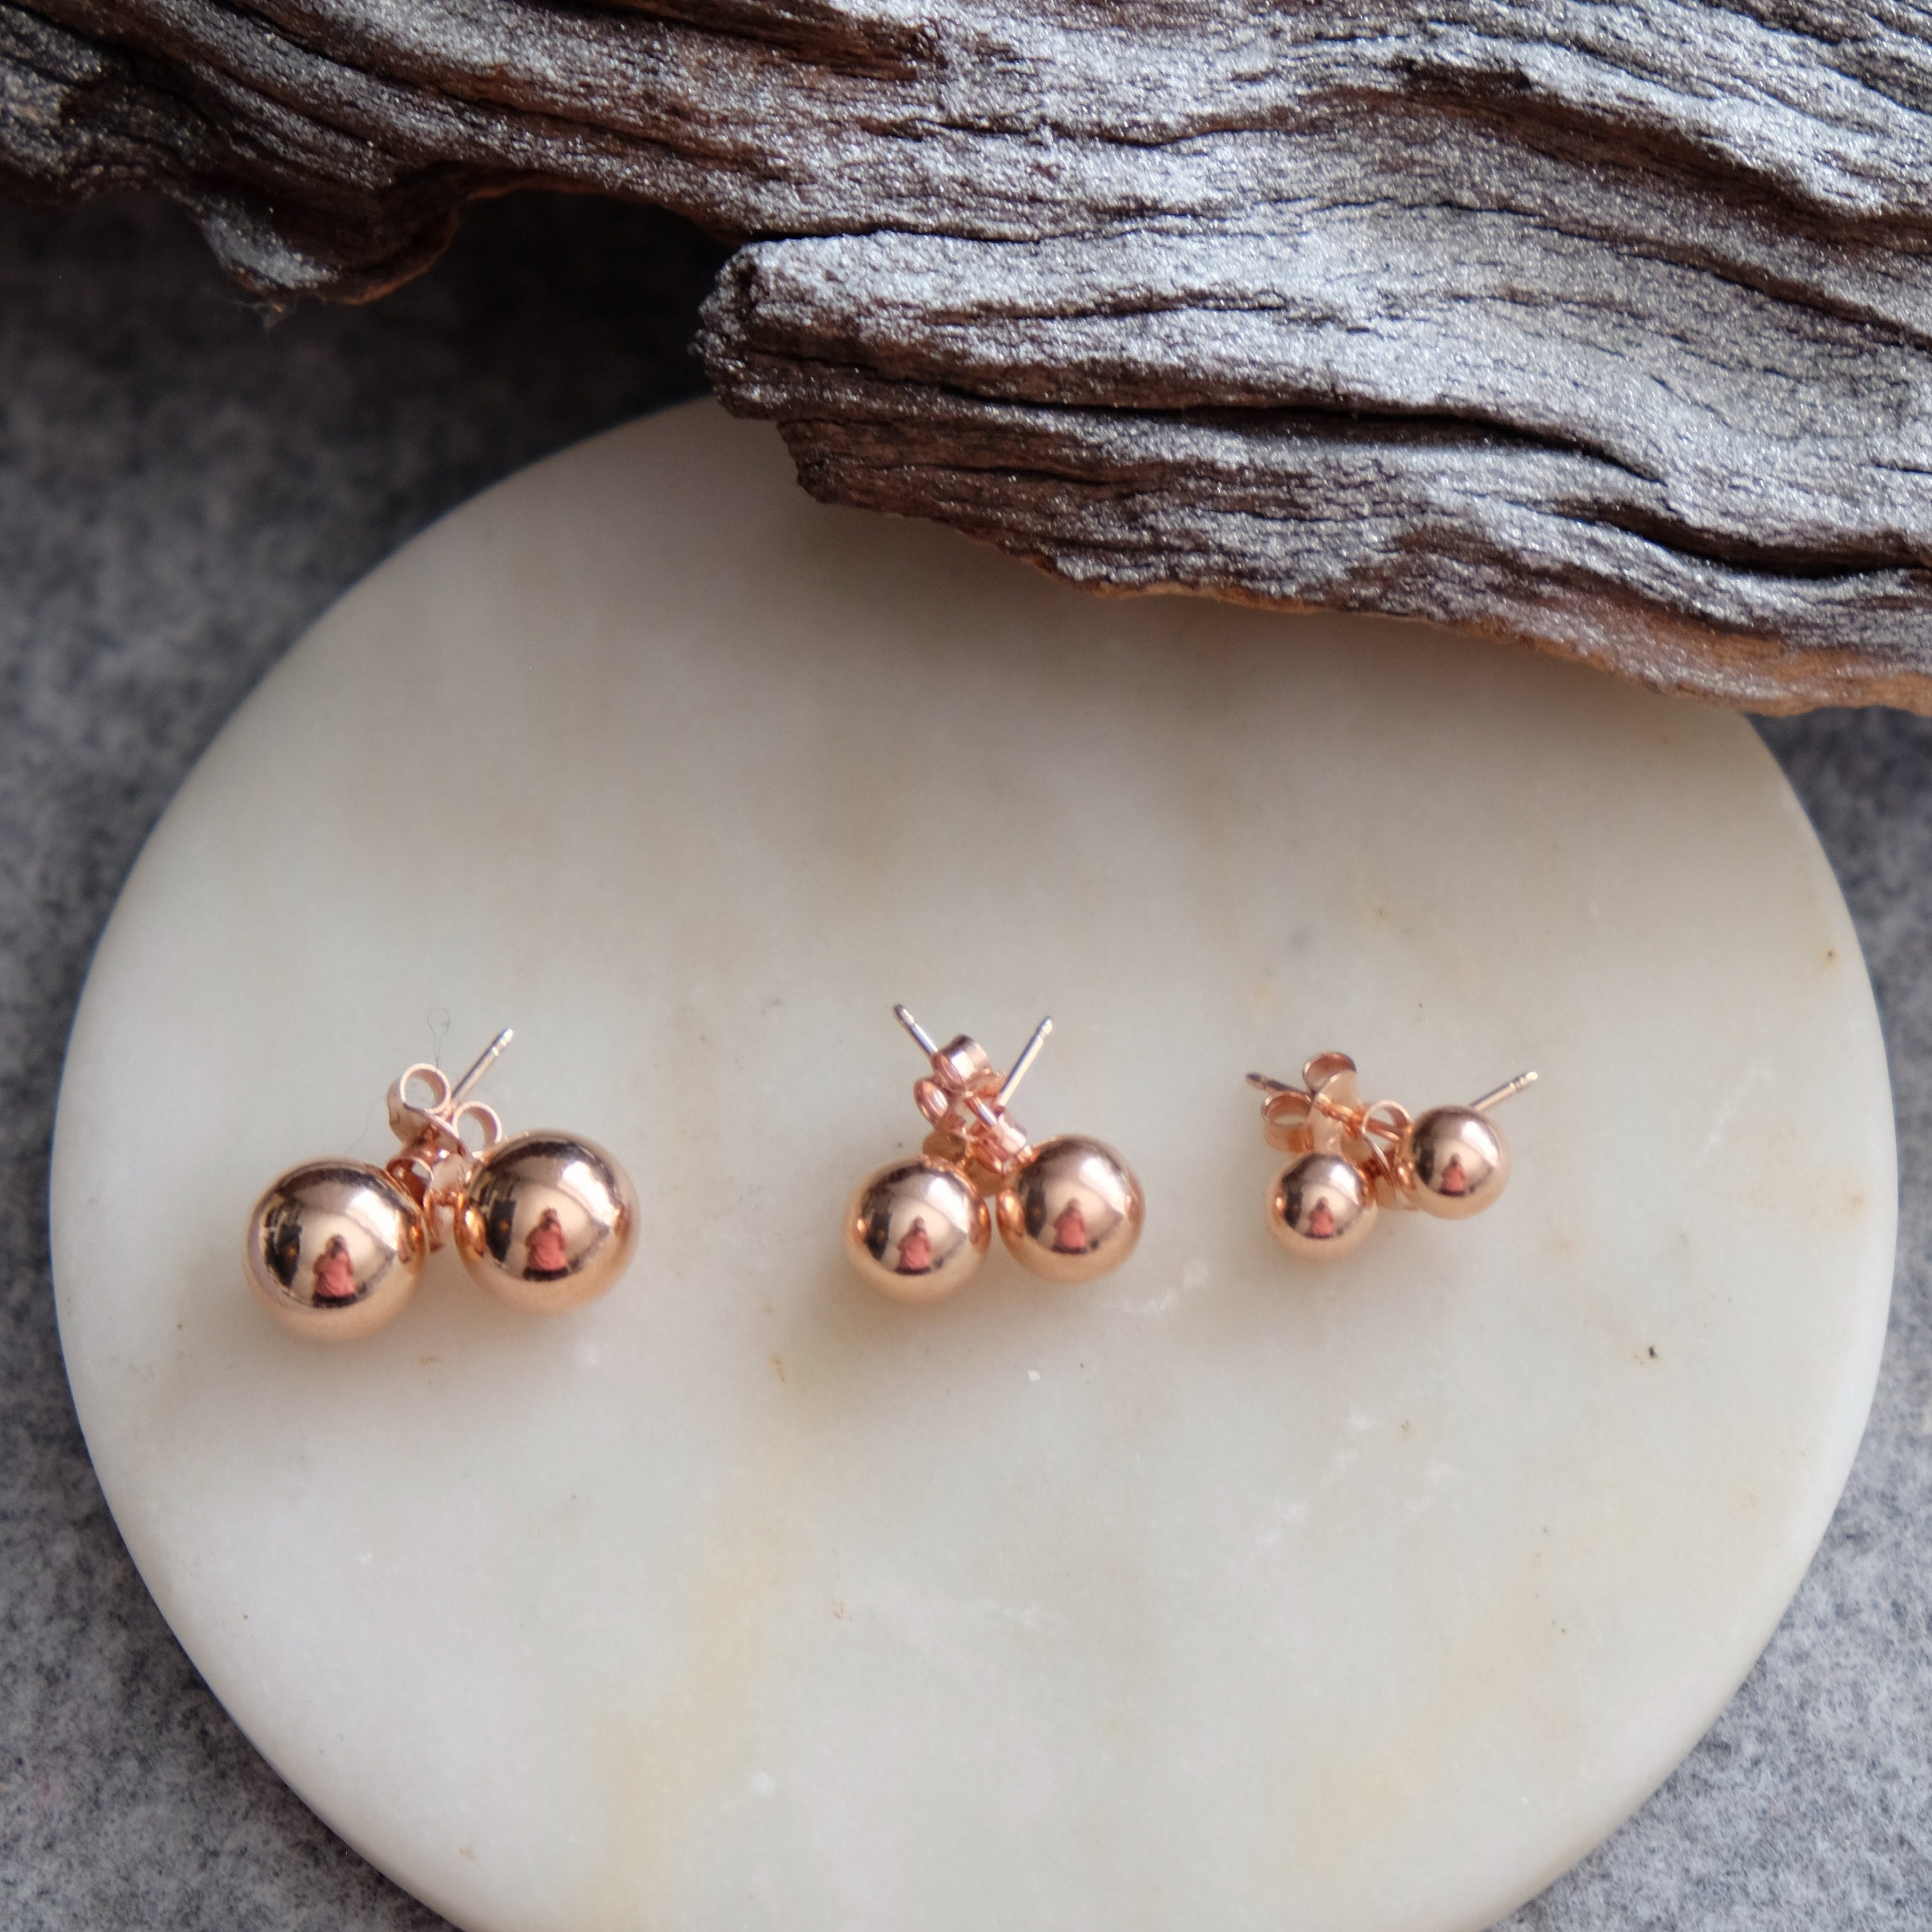 8mm Sterling Silver Ball Stud Earrings in 4mm 12mm and 14mm in Silver 10mm Gold or Rose Gold 6mm